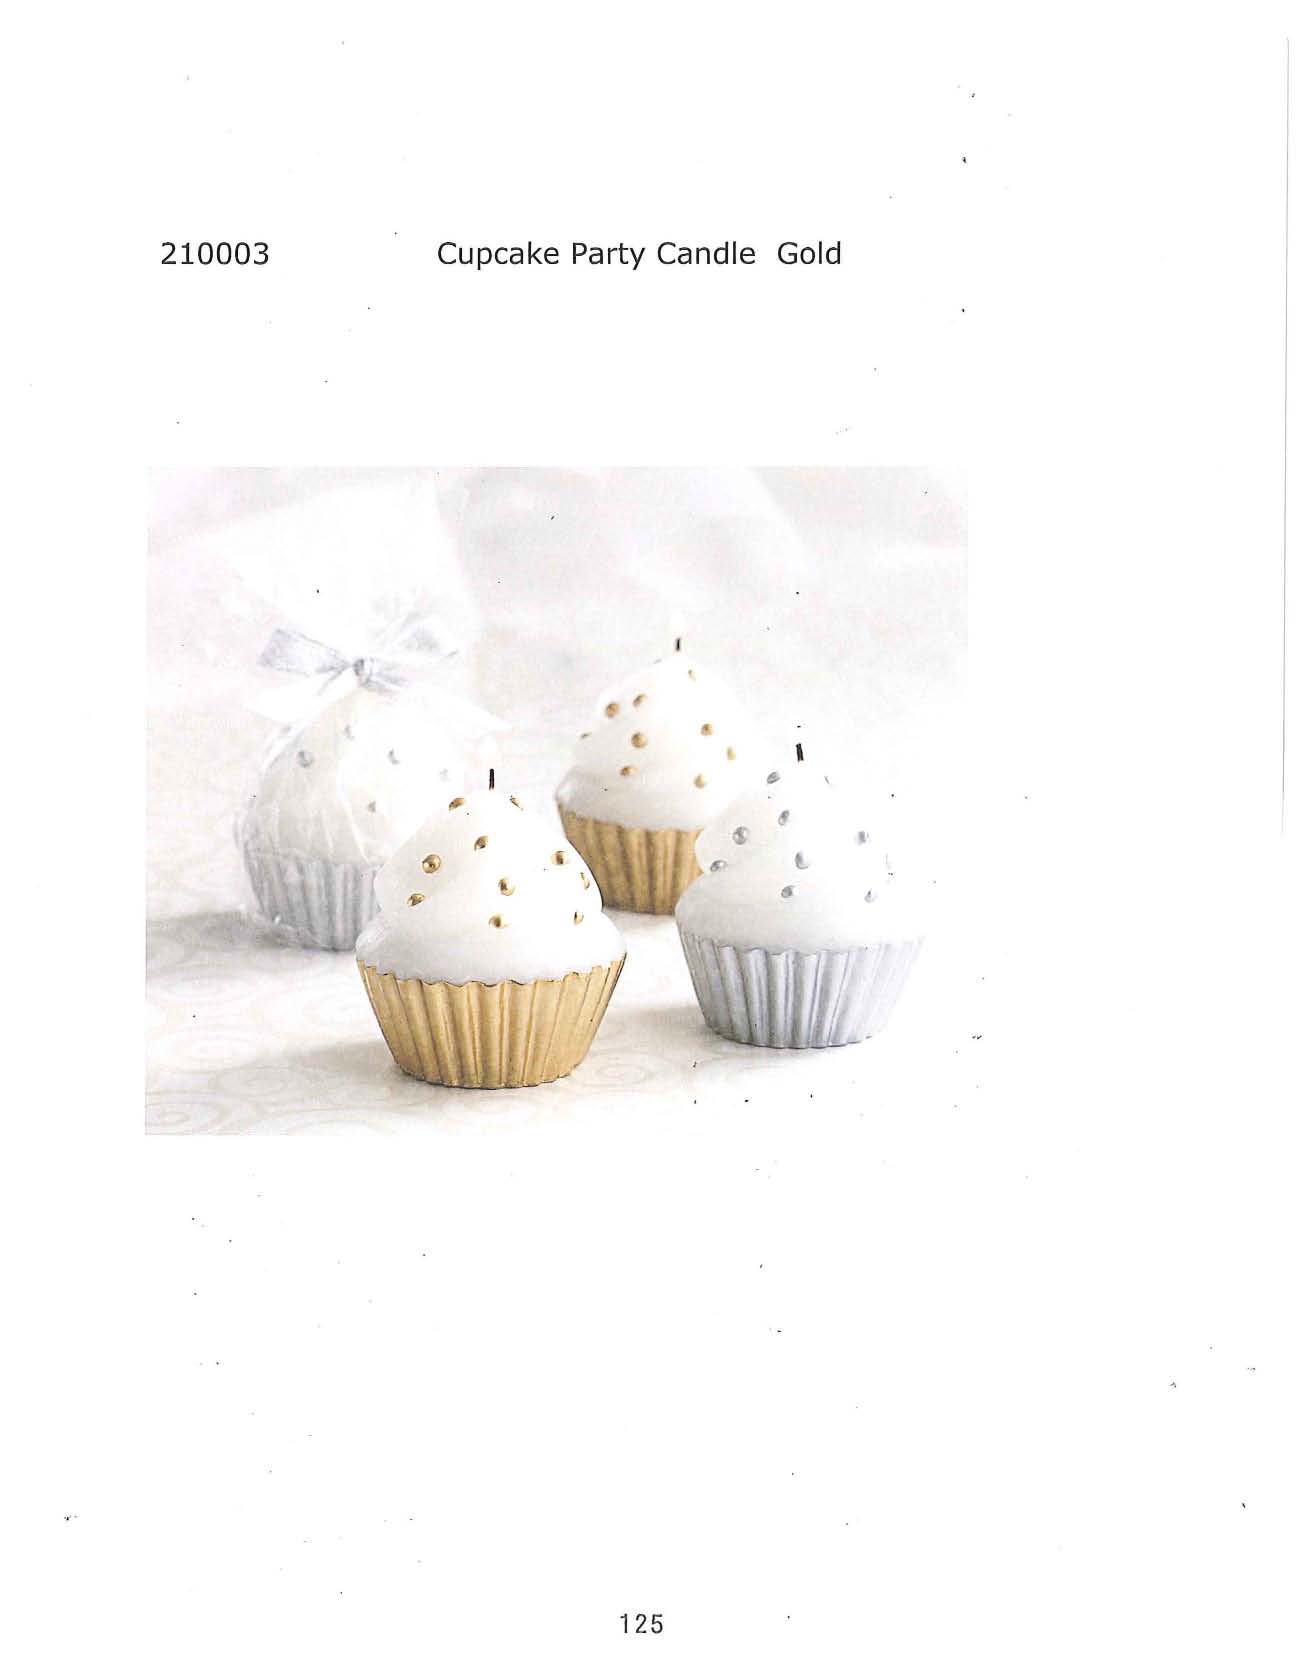 Cupcake Party Candle - Gold